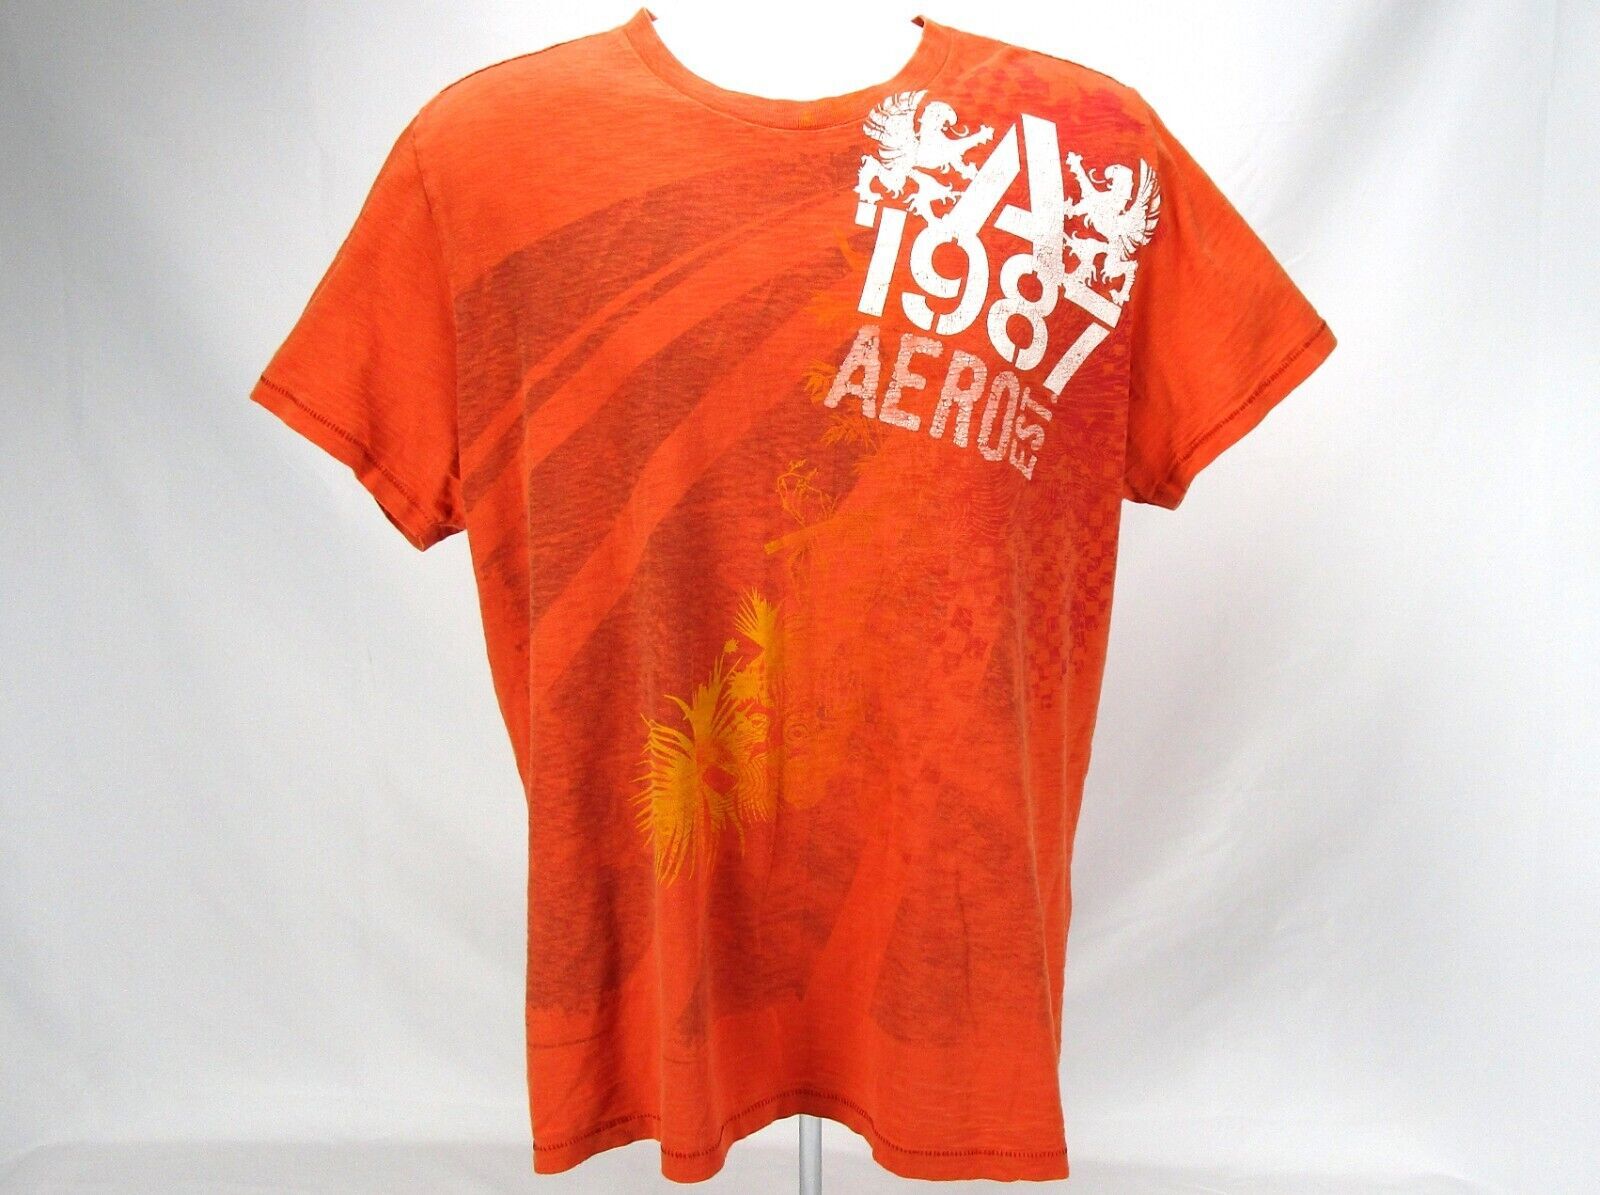 Primary image for Aeropostale 1987 T-Shirt Sz XL Men's or Youth Lightweight Casual Orange Apparel